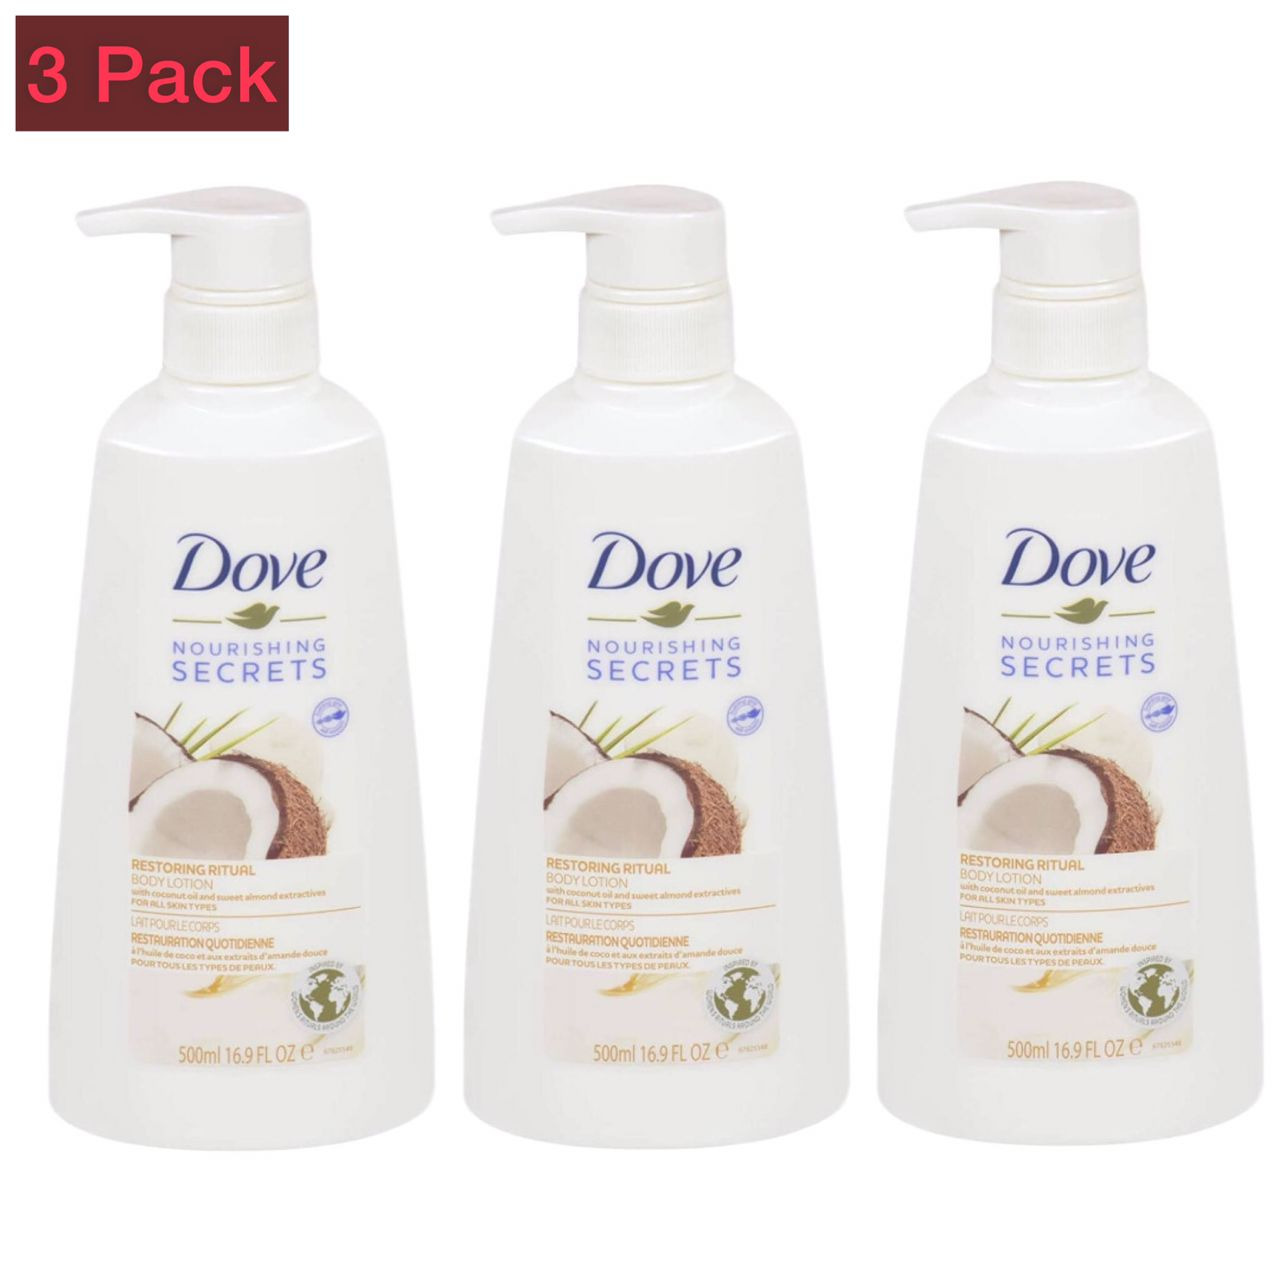 3 Pcs Bundle Dove Nourishing Secrets Restoring Body Lotion, Dry Skin Relief for Women with Coconut Oil and Sweet Almond Extracts - 16.9 FL OZ Pump Bottle (3X500ml) (Cargo)